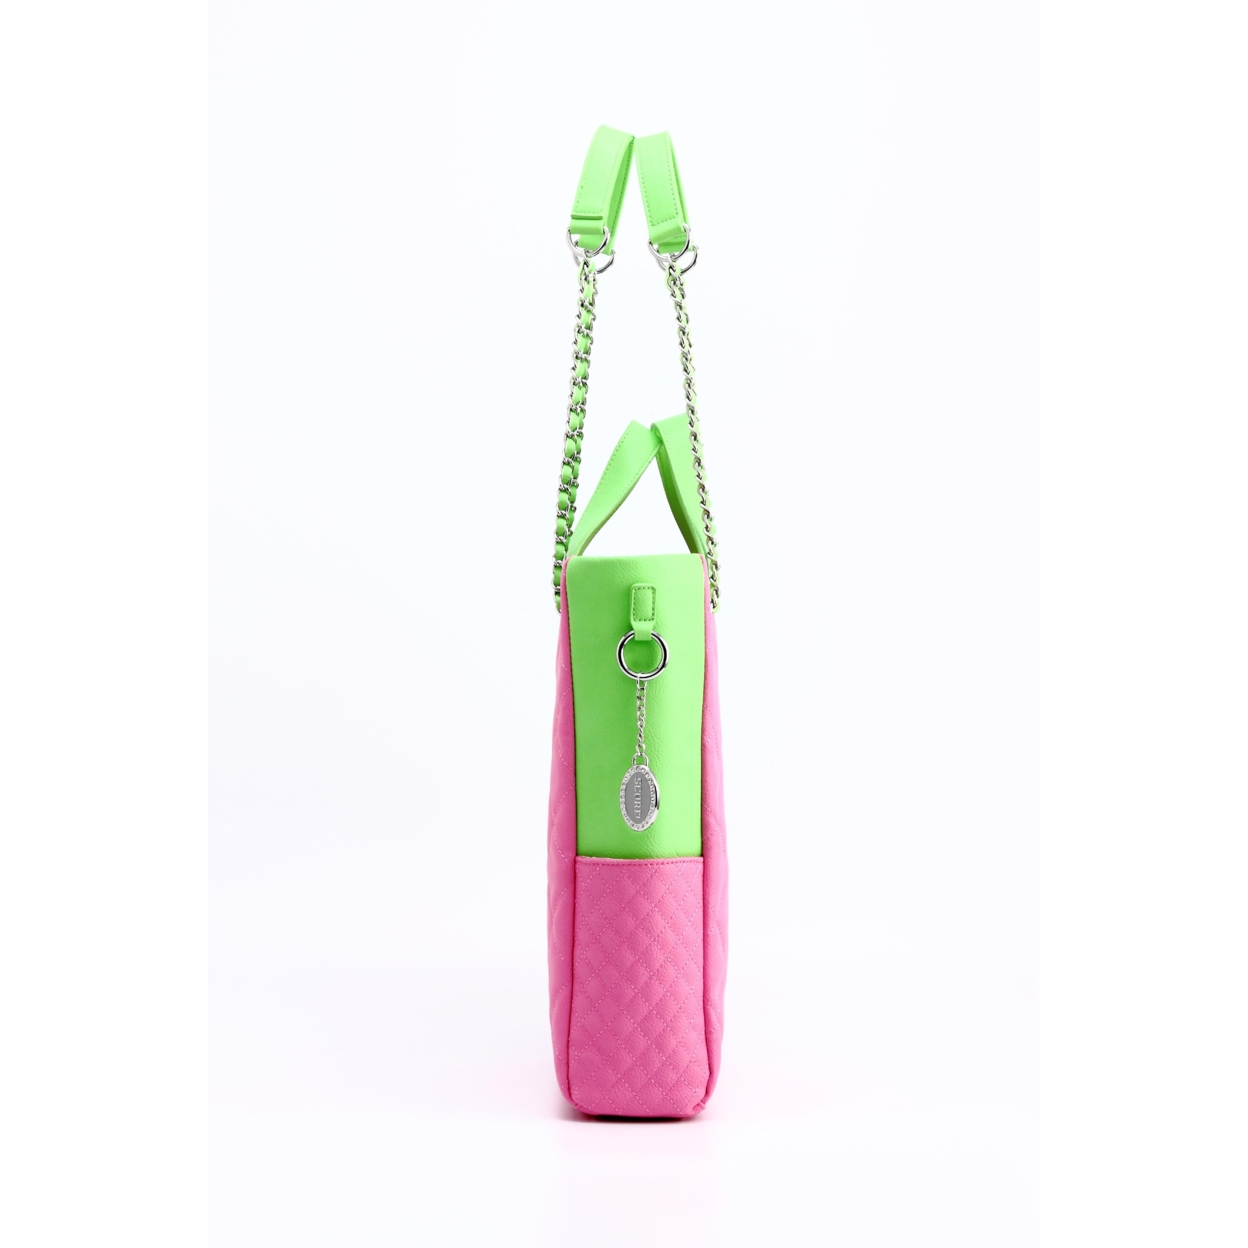 SCORE!'s Kat Travel Tote For Business, Work, Or School Quilted Shoulder Bag - Pink And Lime Green